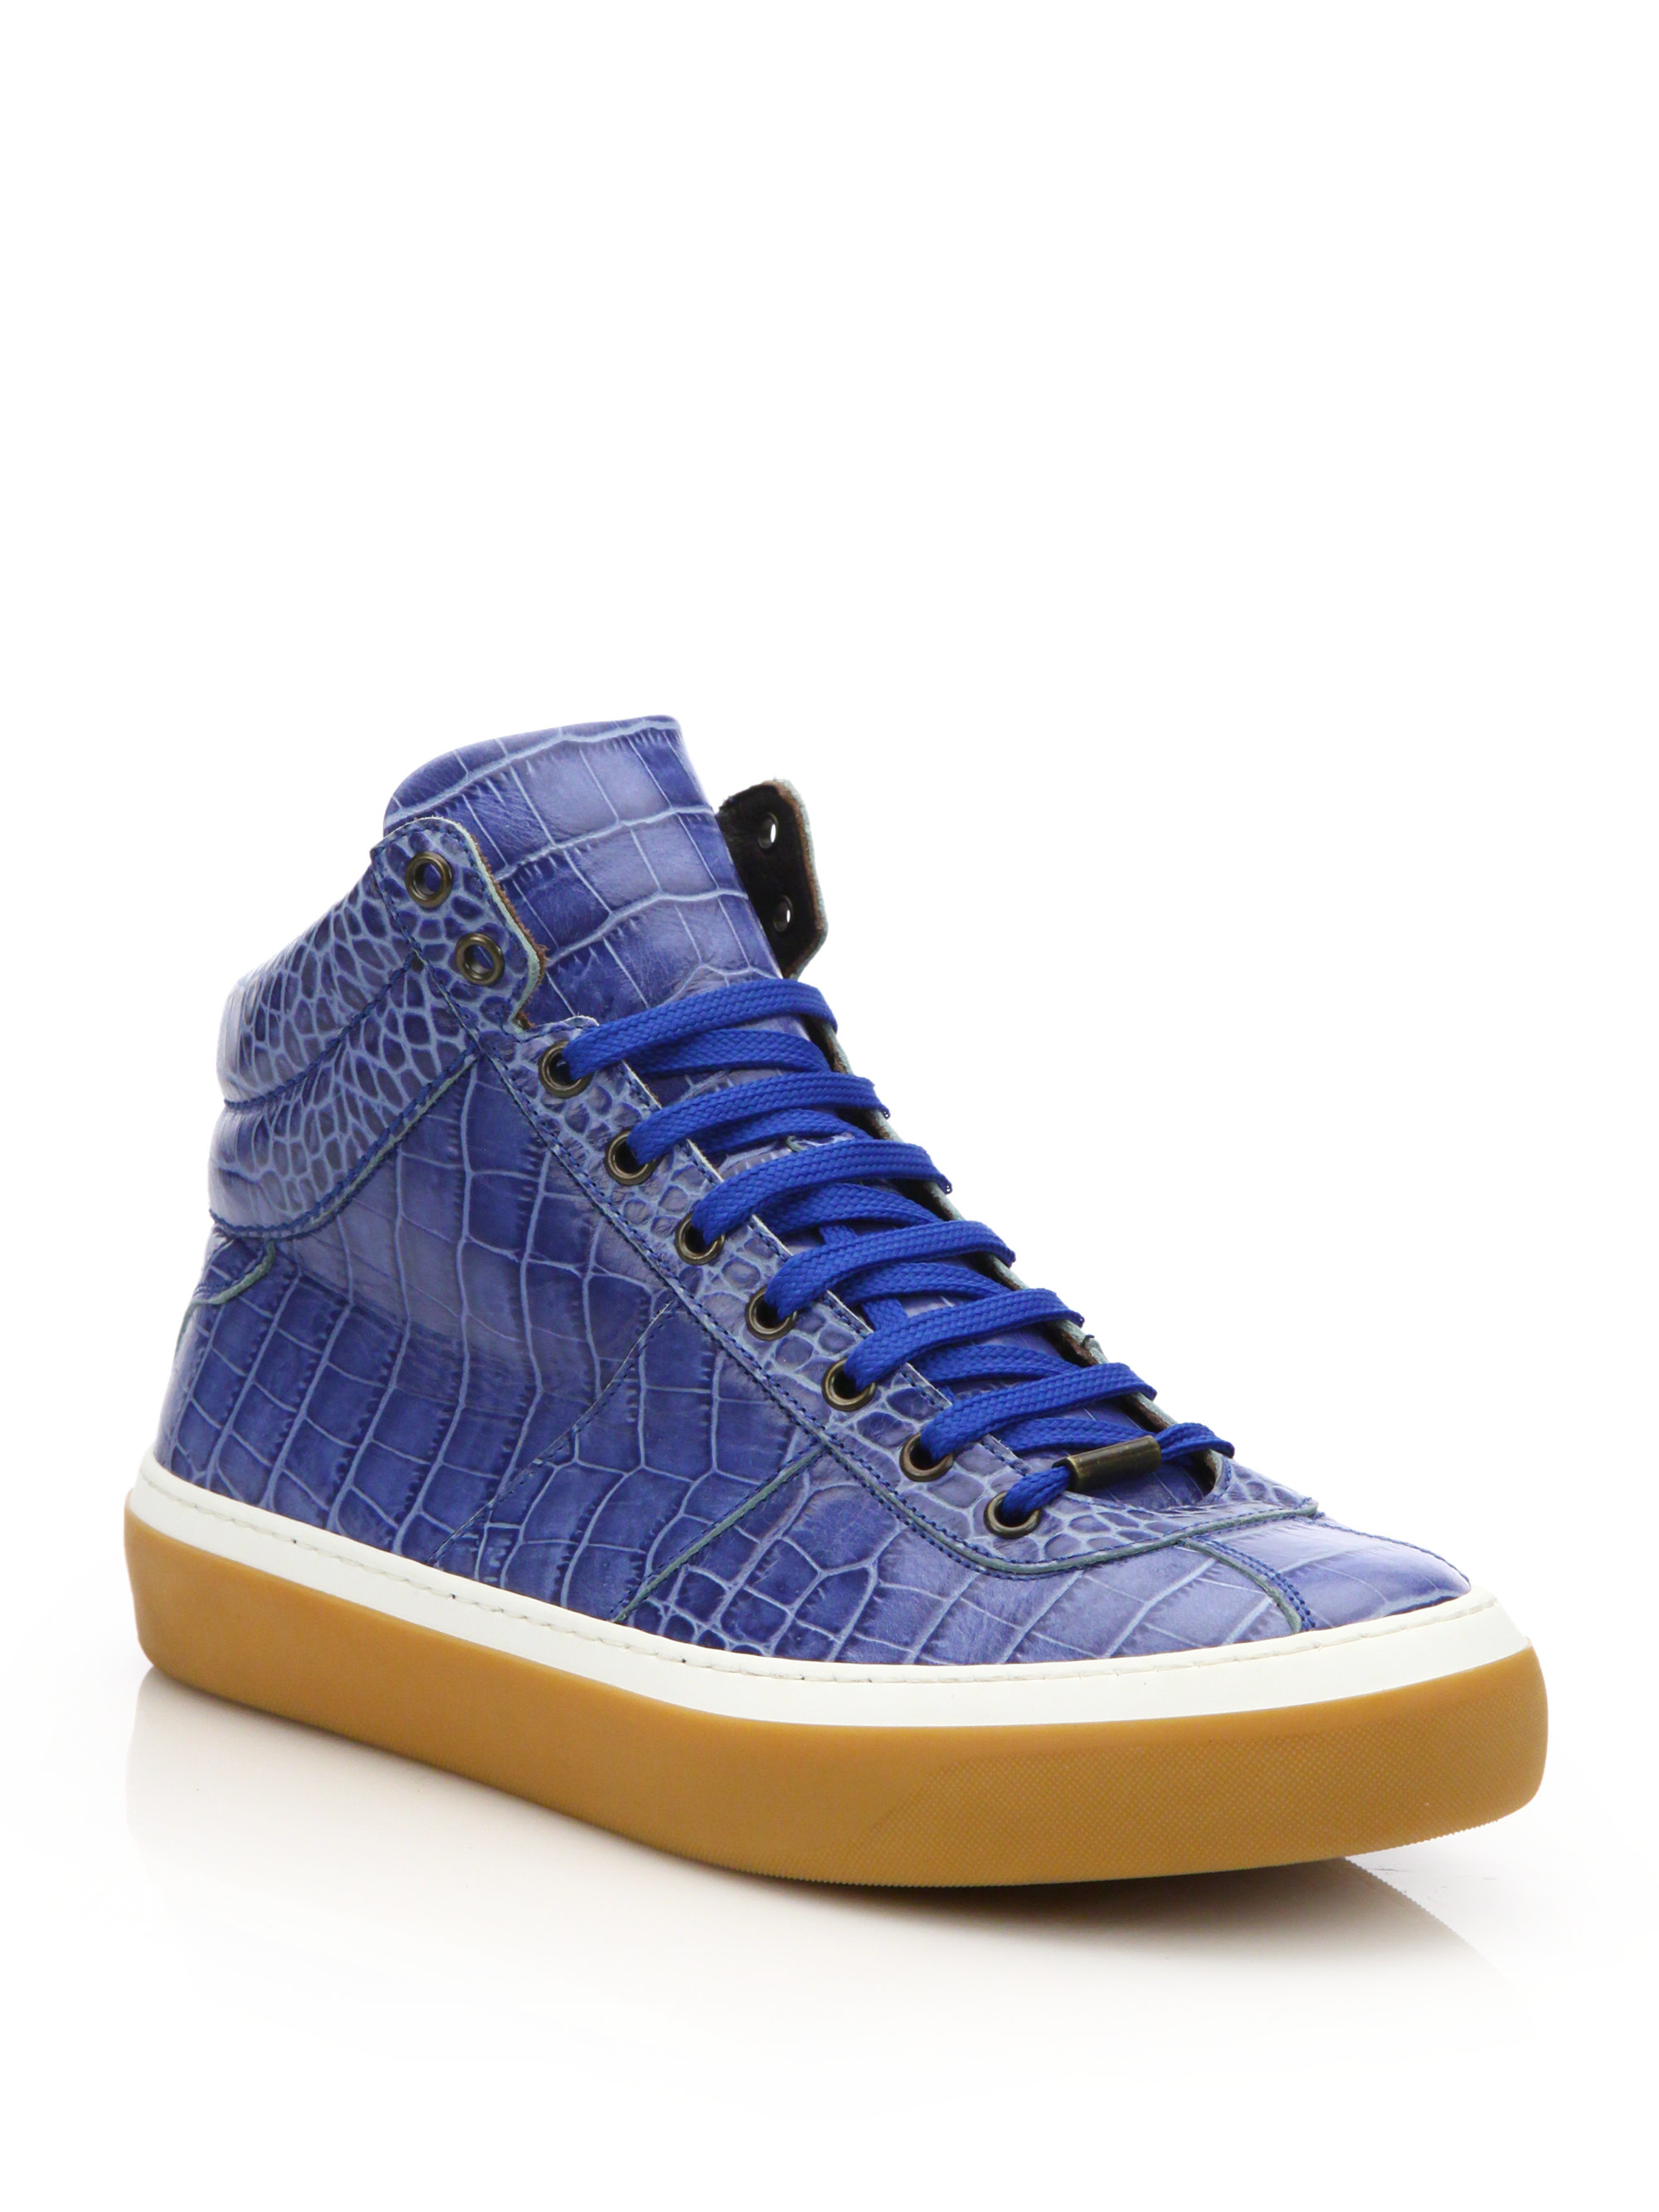 Lyst - Jimmy Choo Shiny Croc-embossed High-top Sneakers in Blue for Men